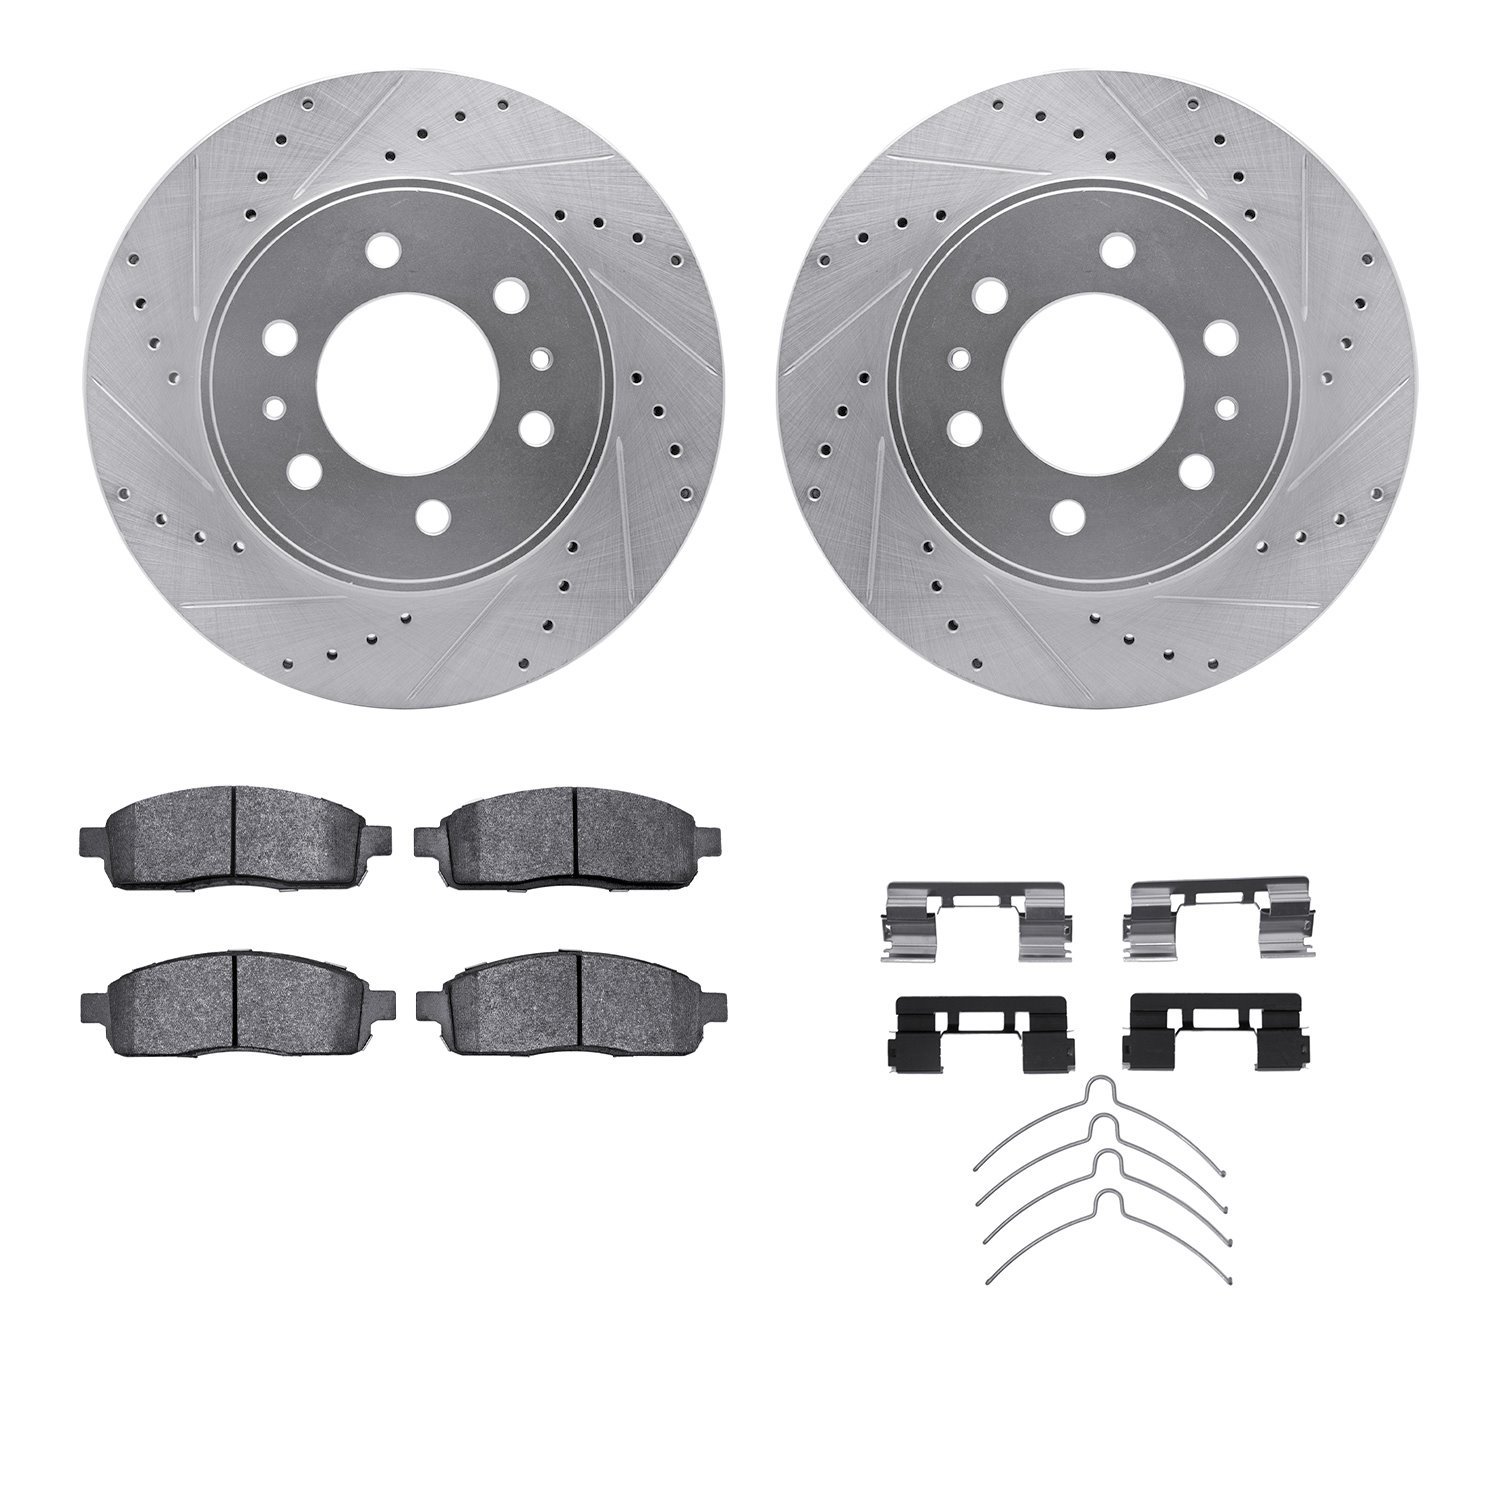 7412-54094 Drilled/Slotted Brake Rotors with Ultimate-Duty Brake Pads Kit & Hardware [Silver], 2009-2009 Ford/Lincoln/Mercury/Ma